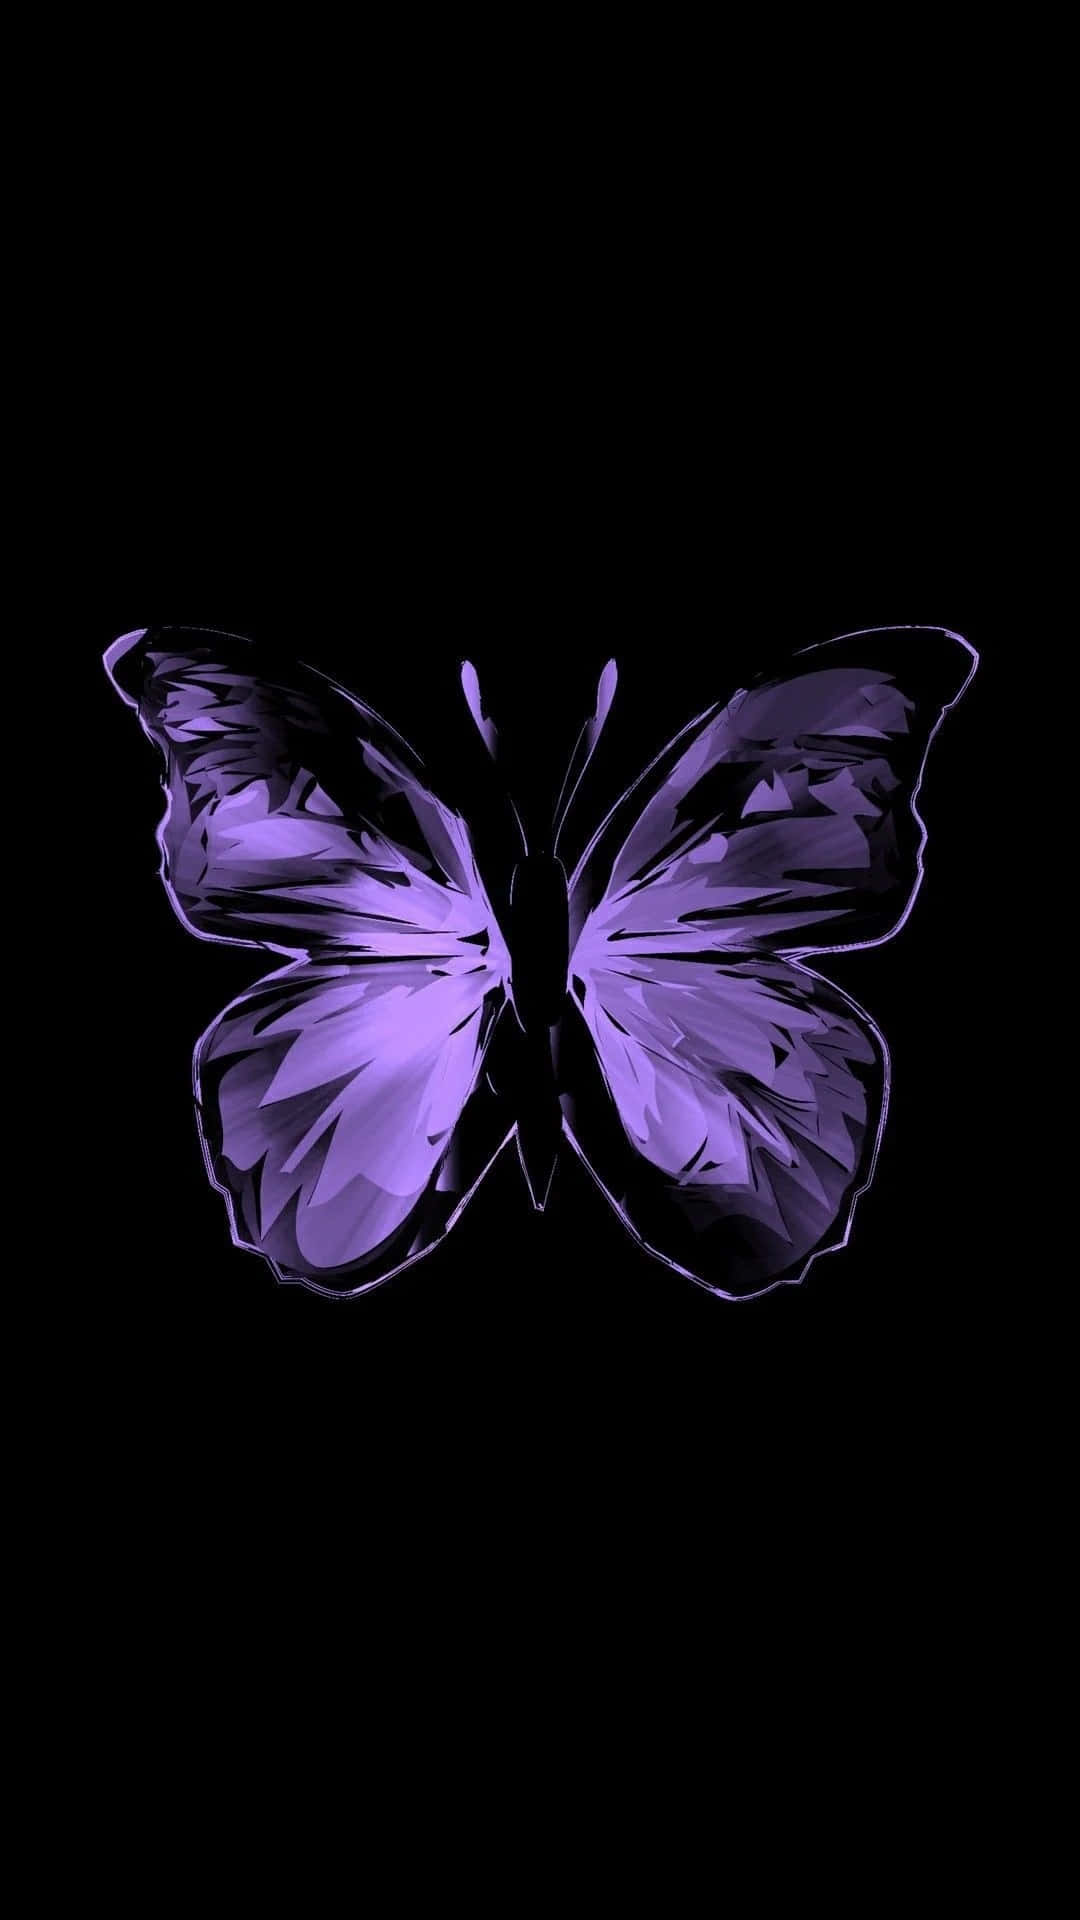 A Dramatic Black And Purple Background